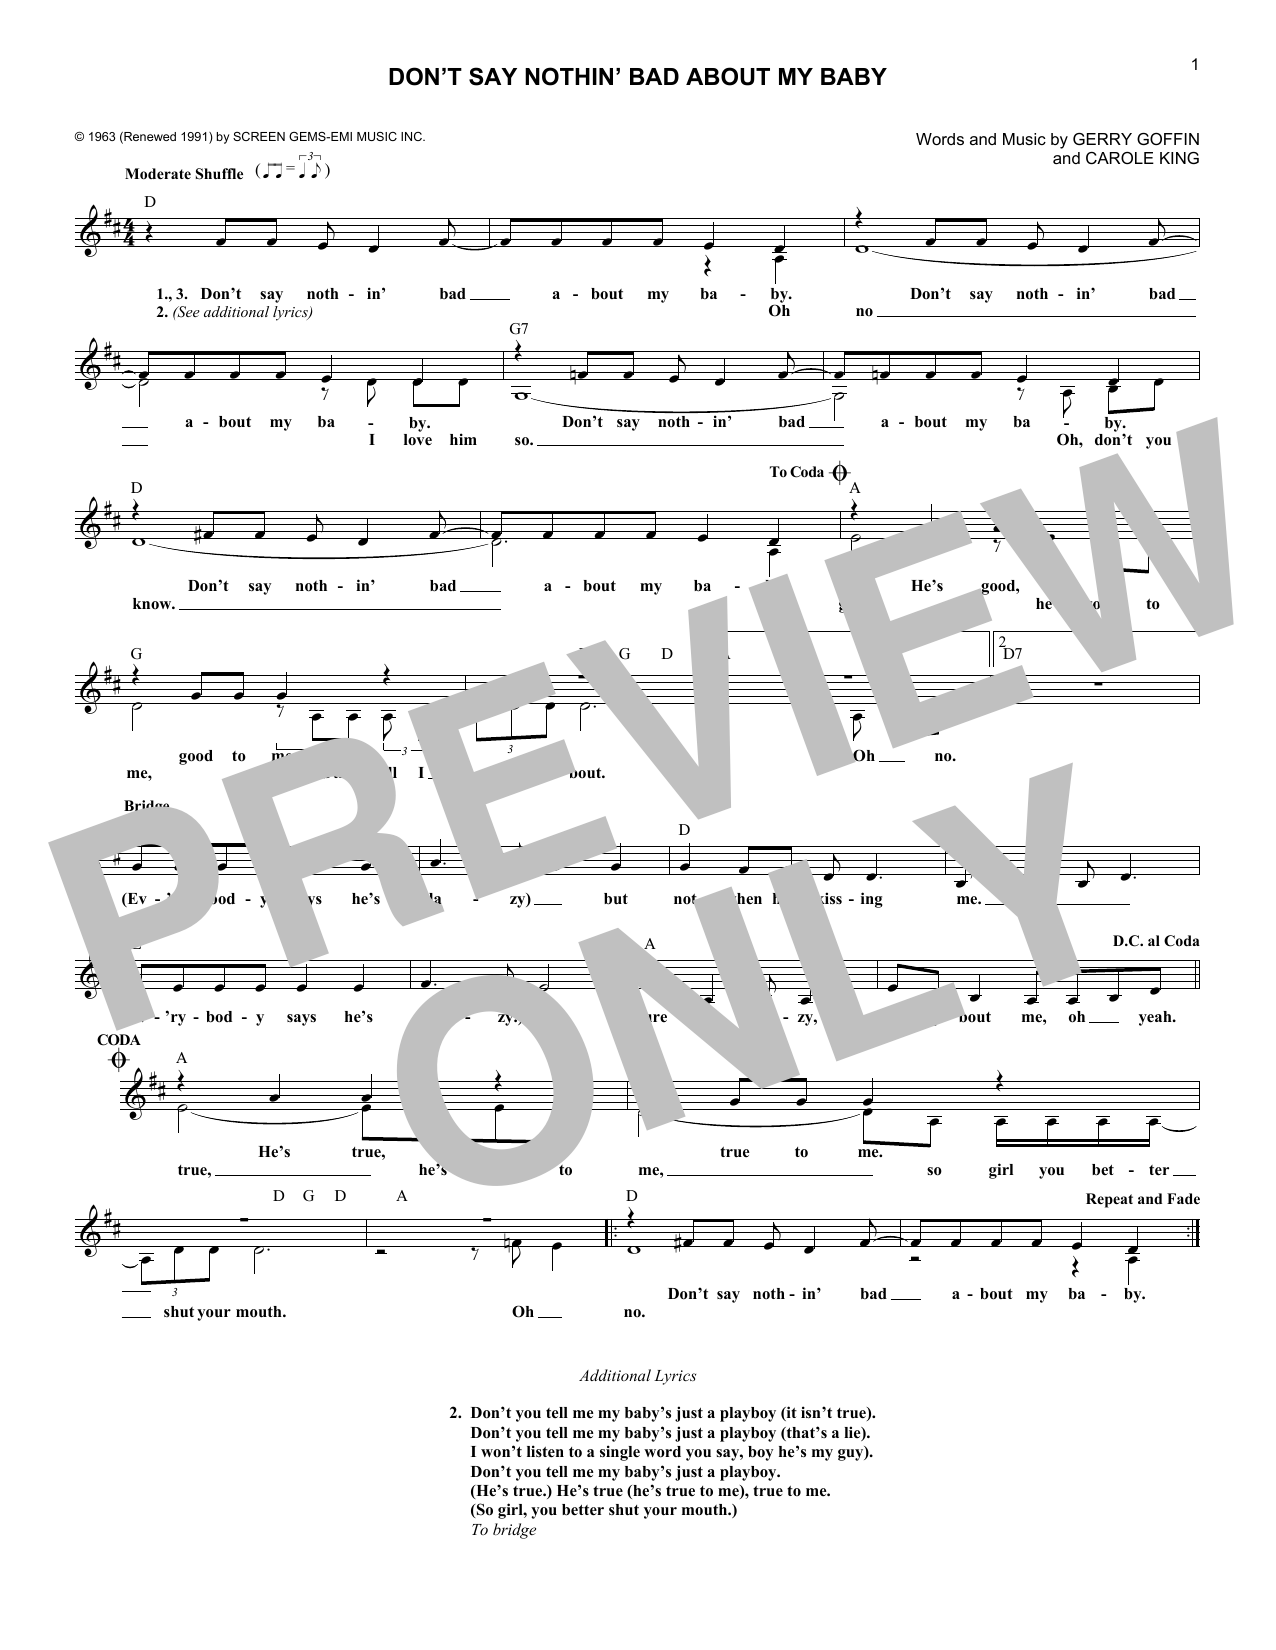 Download The Cookies Don't Say Nothin' Bad About My Baby Sheet Music